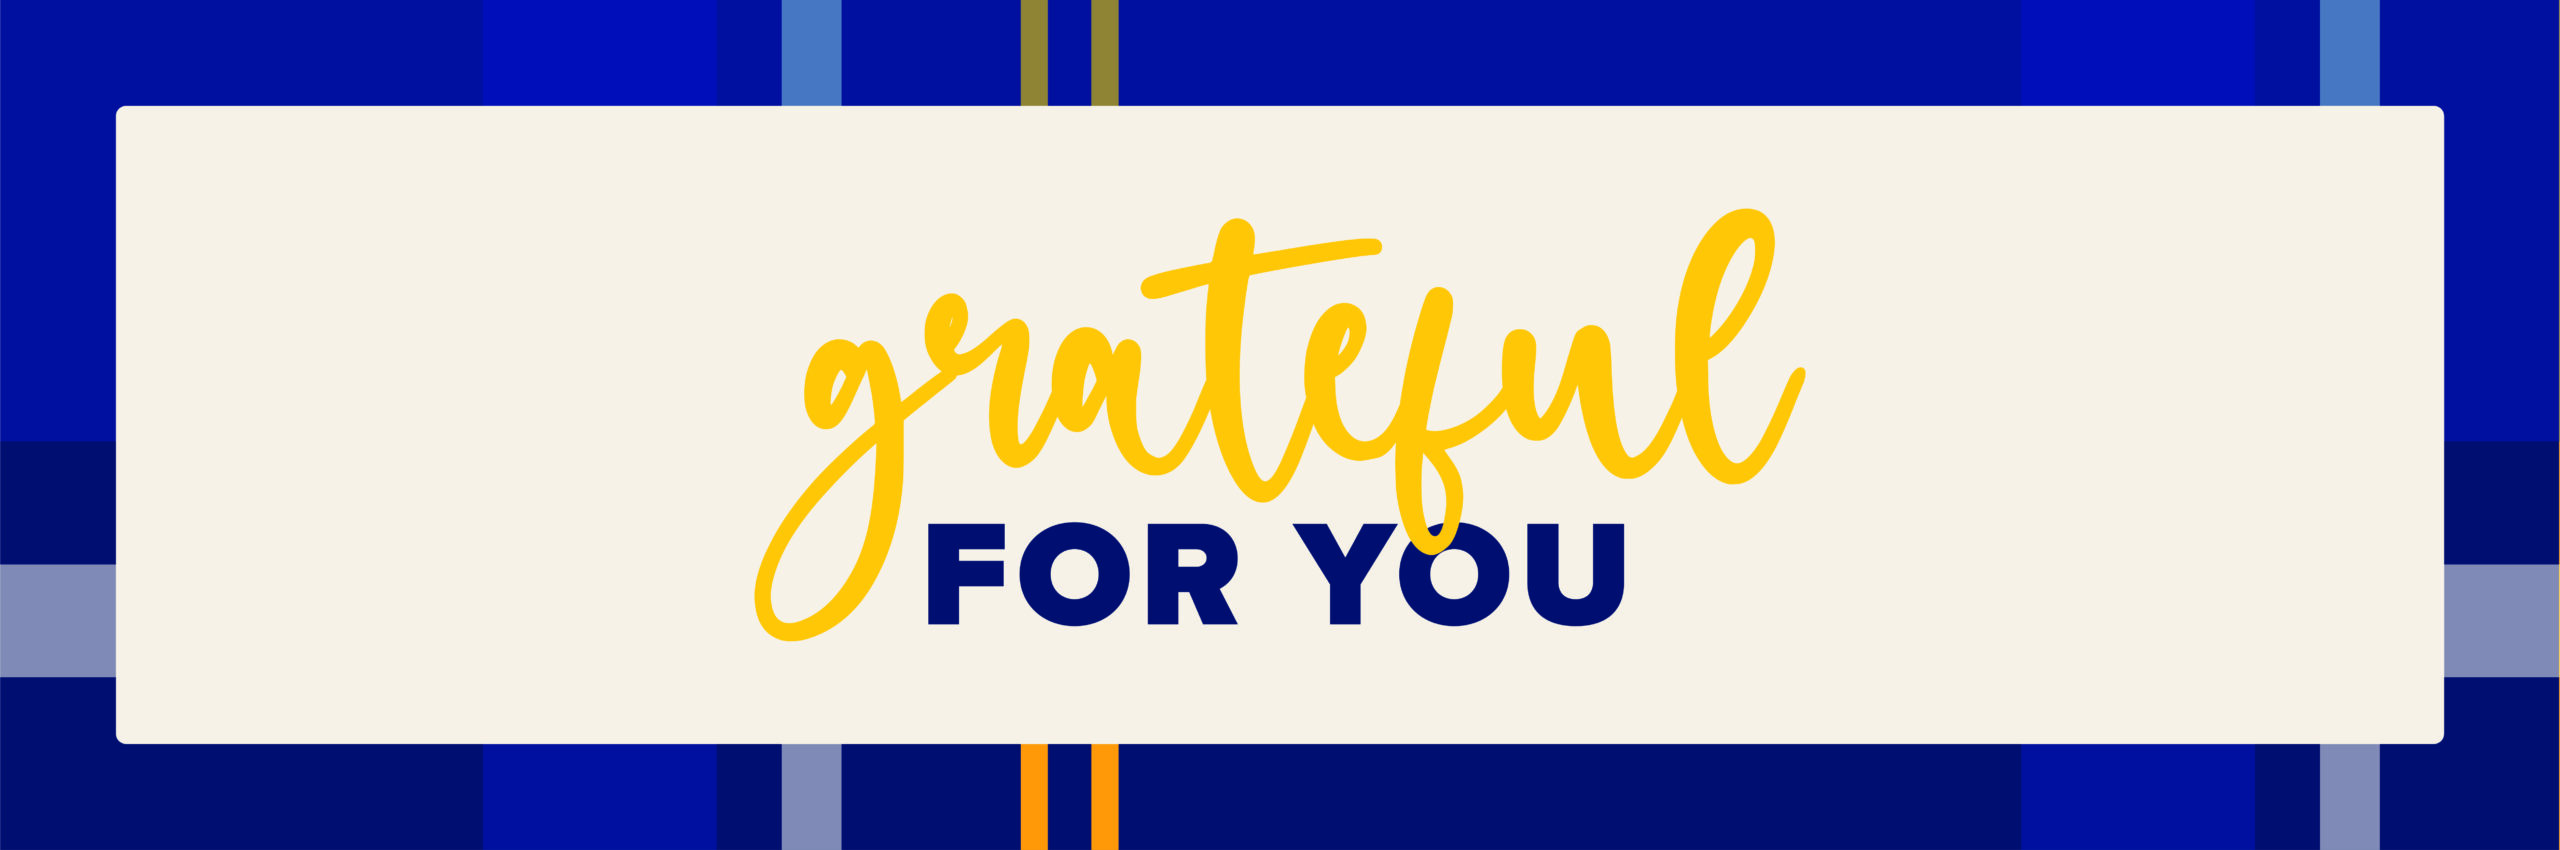 grateful for you with blue border banner graphic